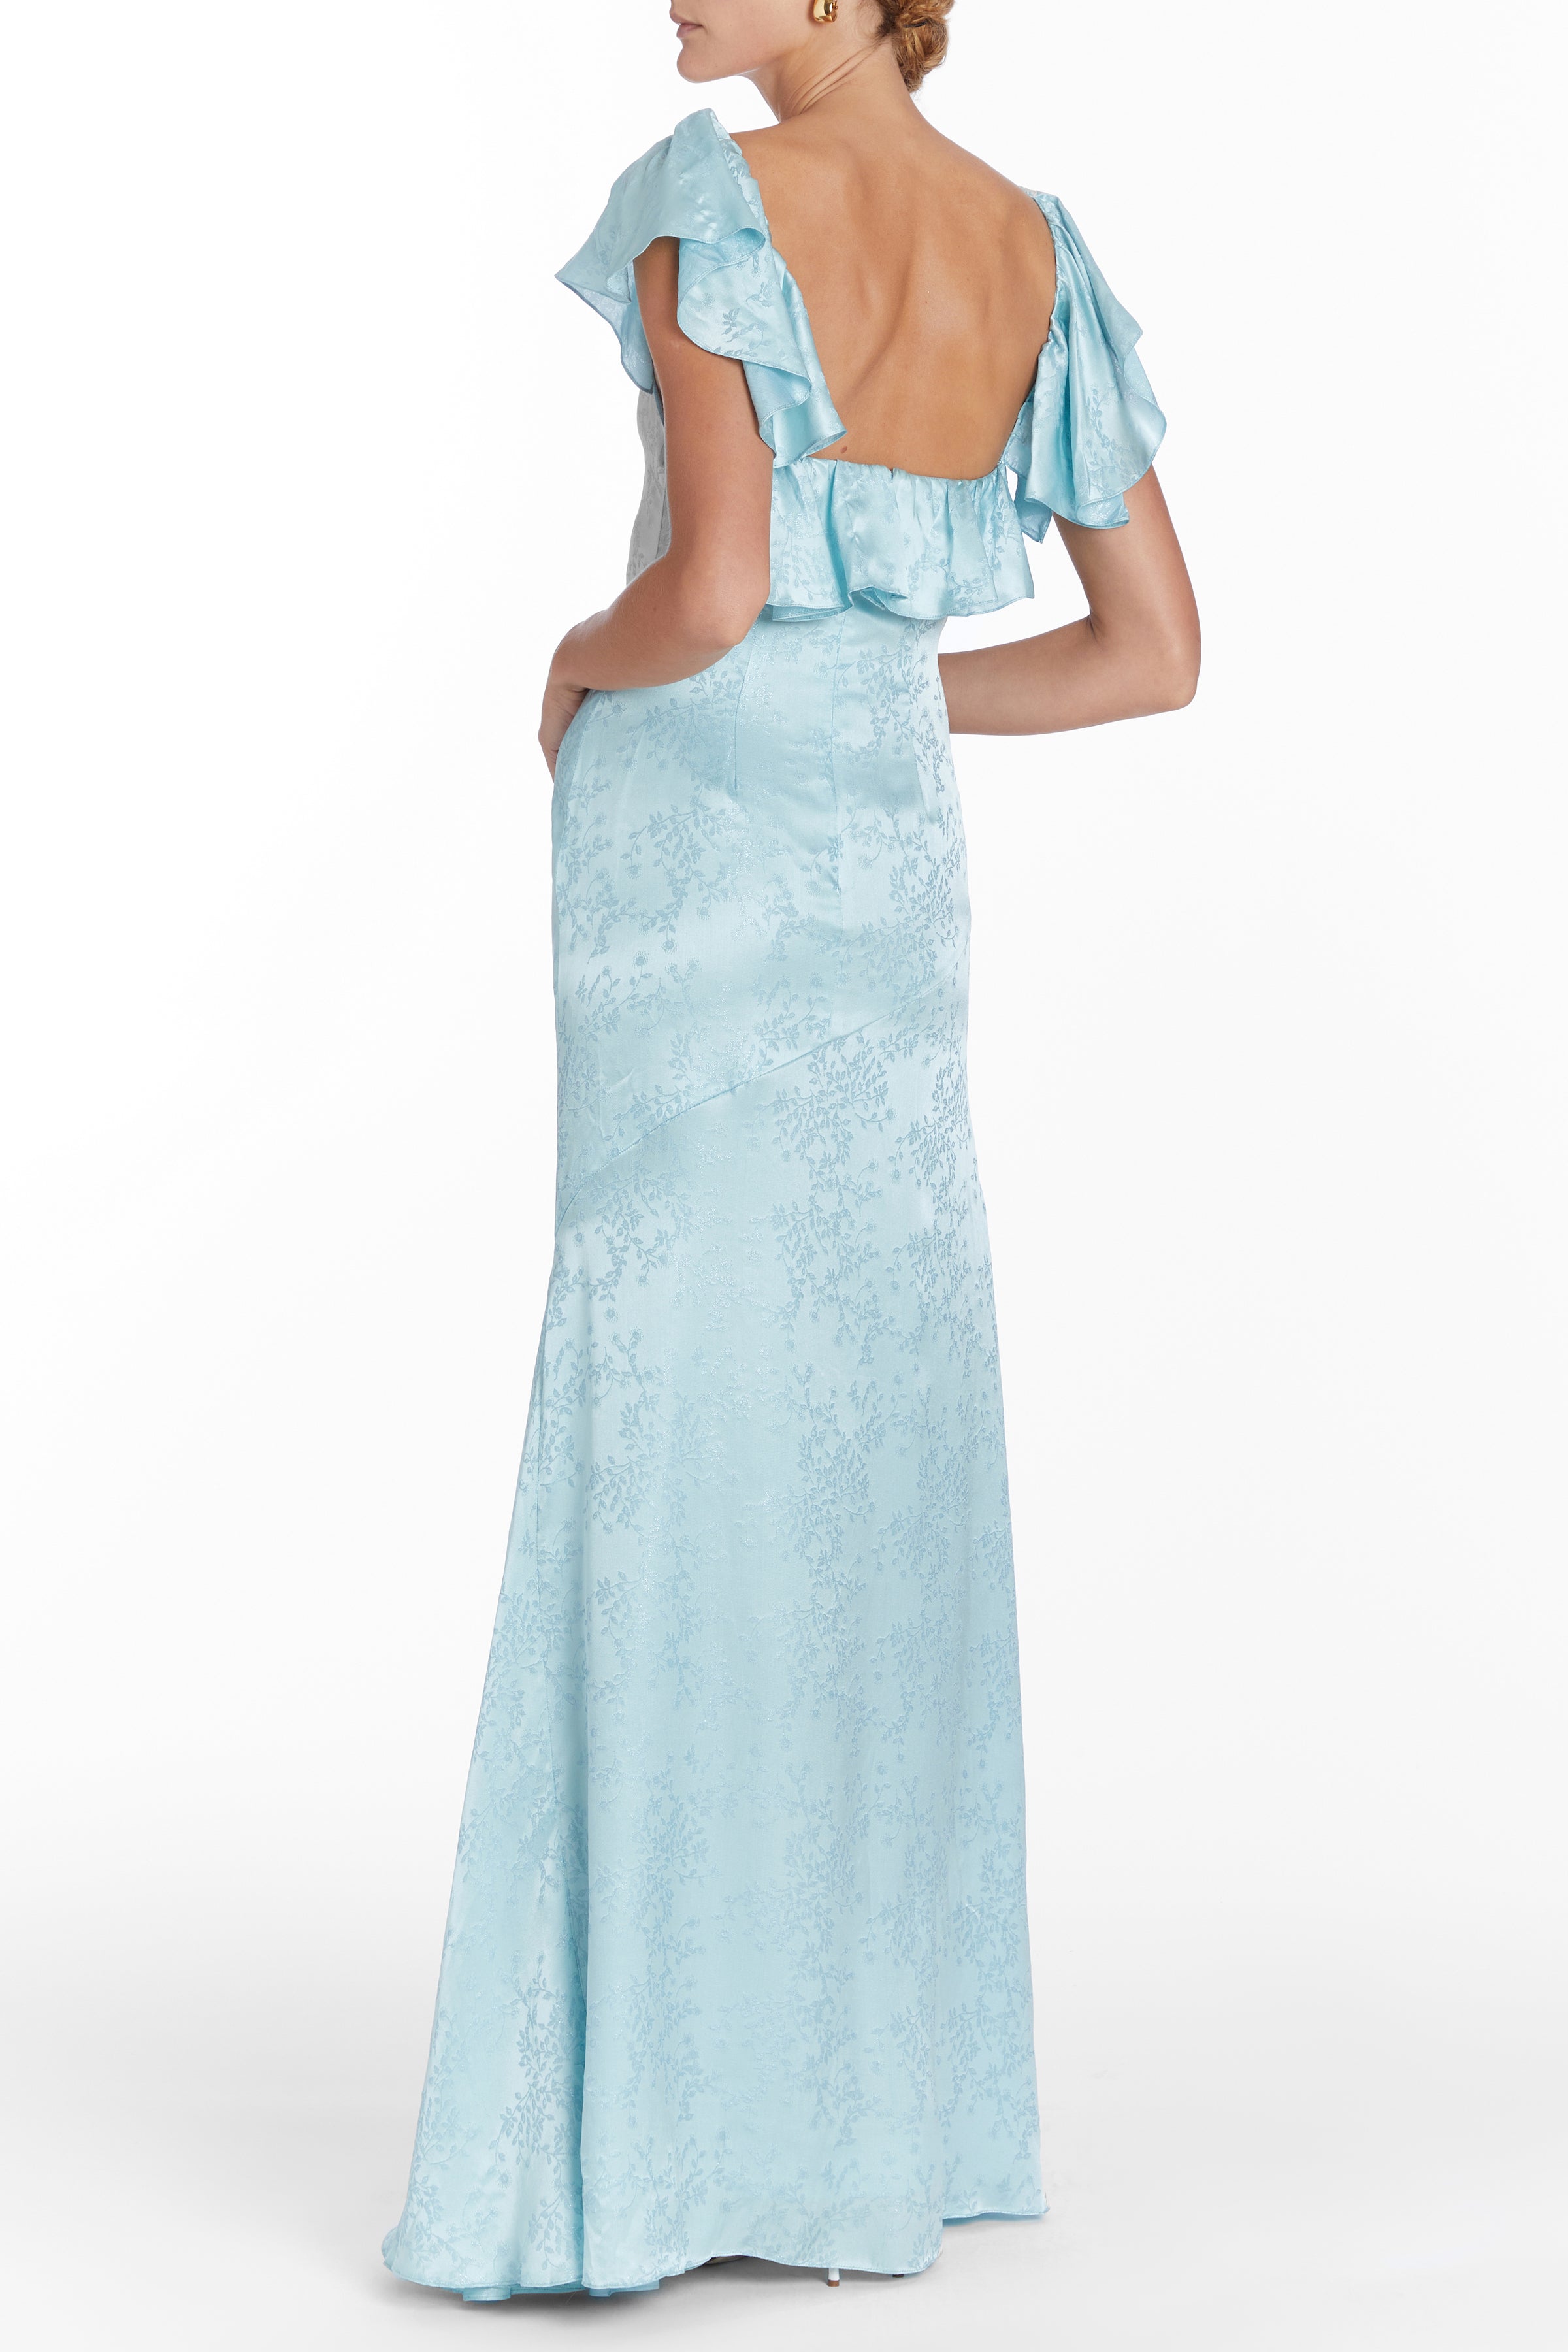 Katharina Light Blue Shimmer Floral Jacquard Ruffled Bodice Gown